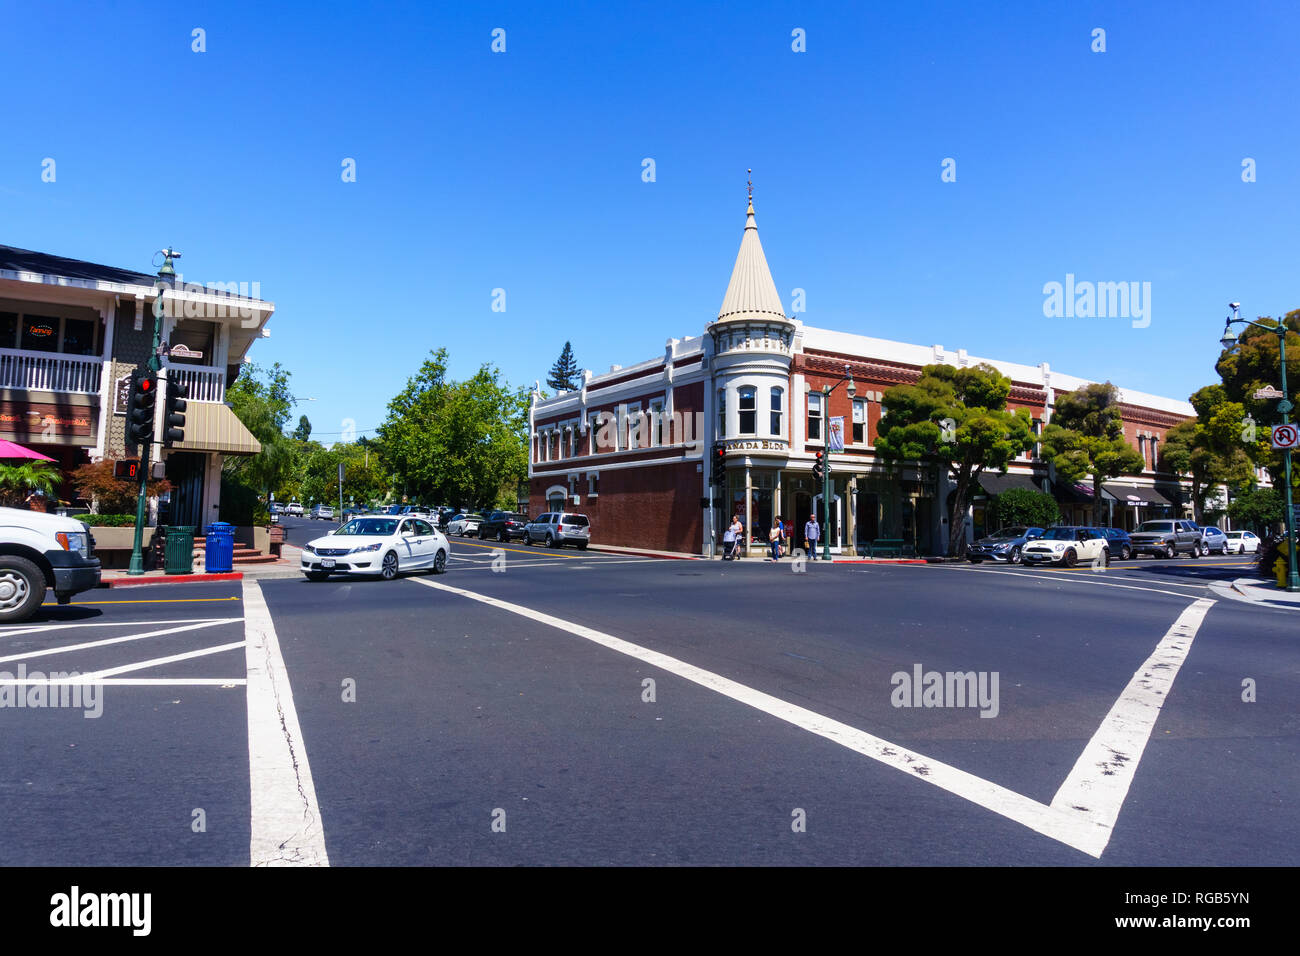 July 30, 2018 Los Gatos / CA / USA - Shopping street in downtown